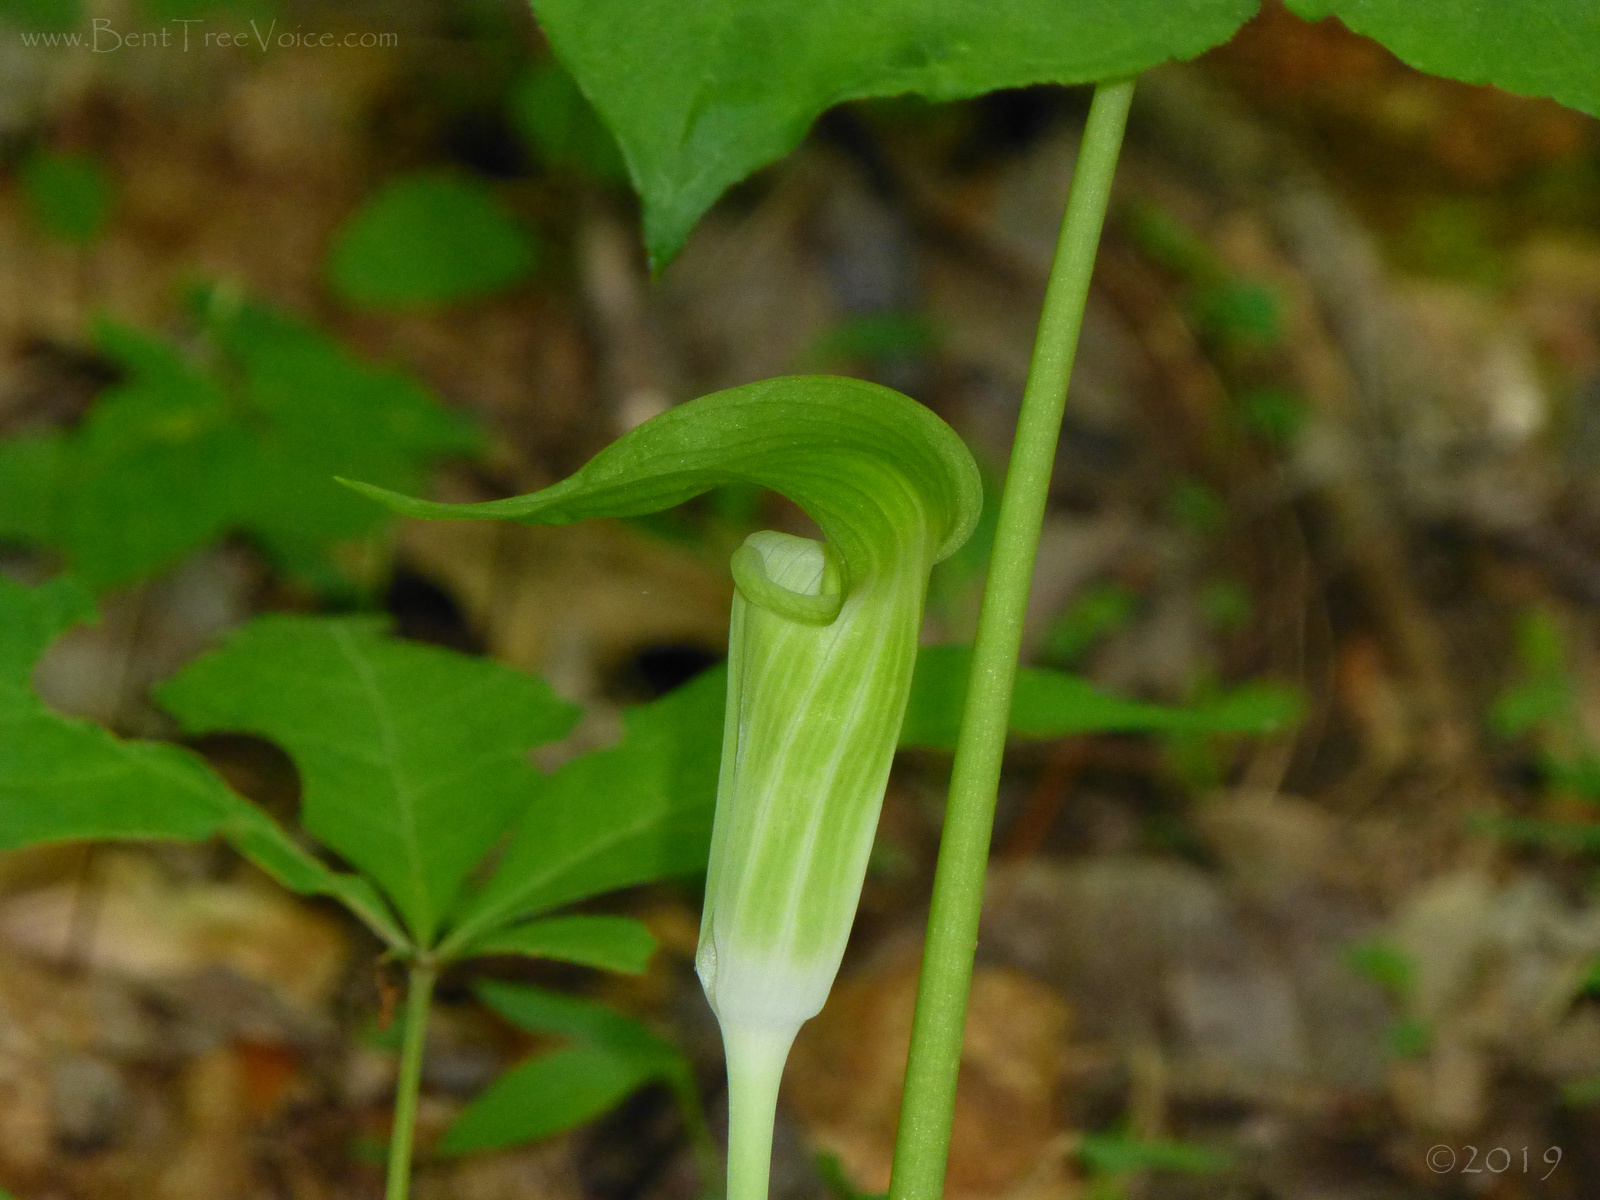 May 4, 2019 - Jack-in-the-Pulpit in Bent Tree